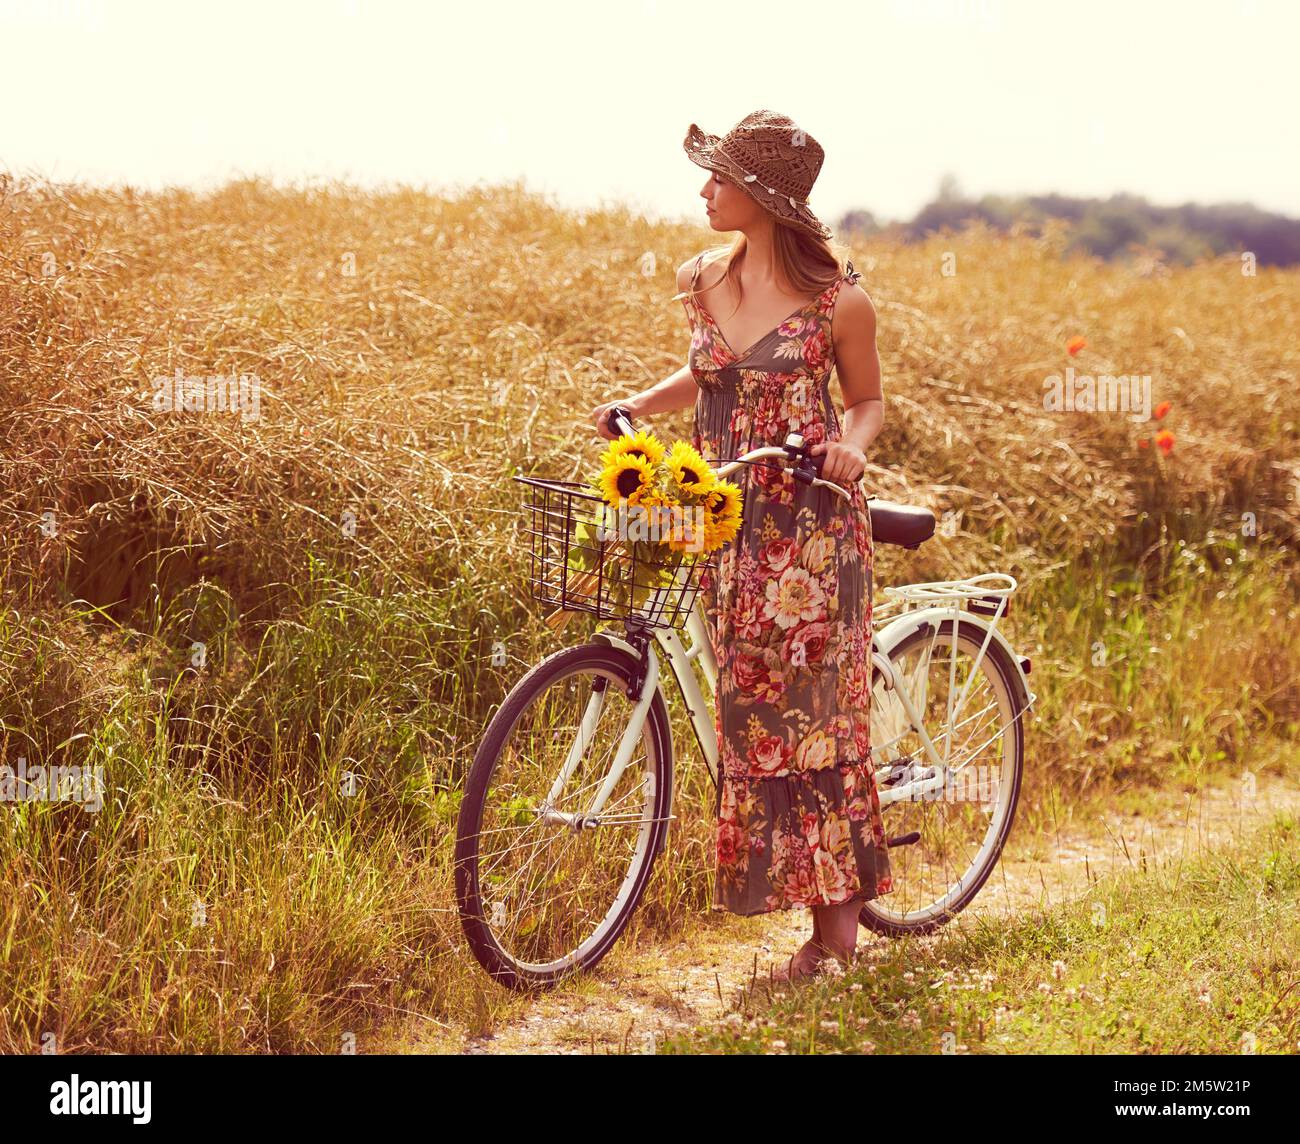 Explore more. a young woman cycling through the countryside with a bunch of sunflowers. Stock Photo